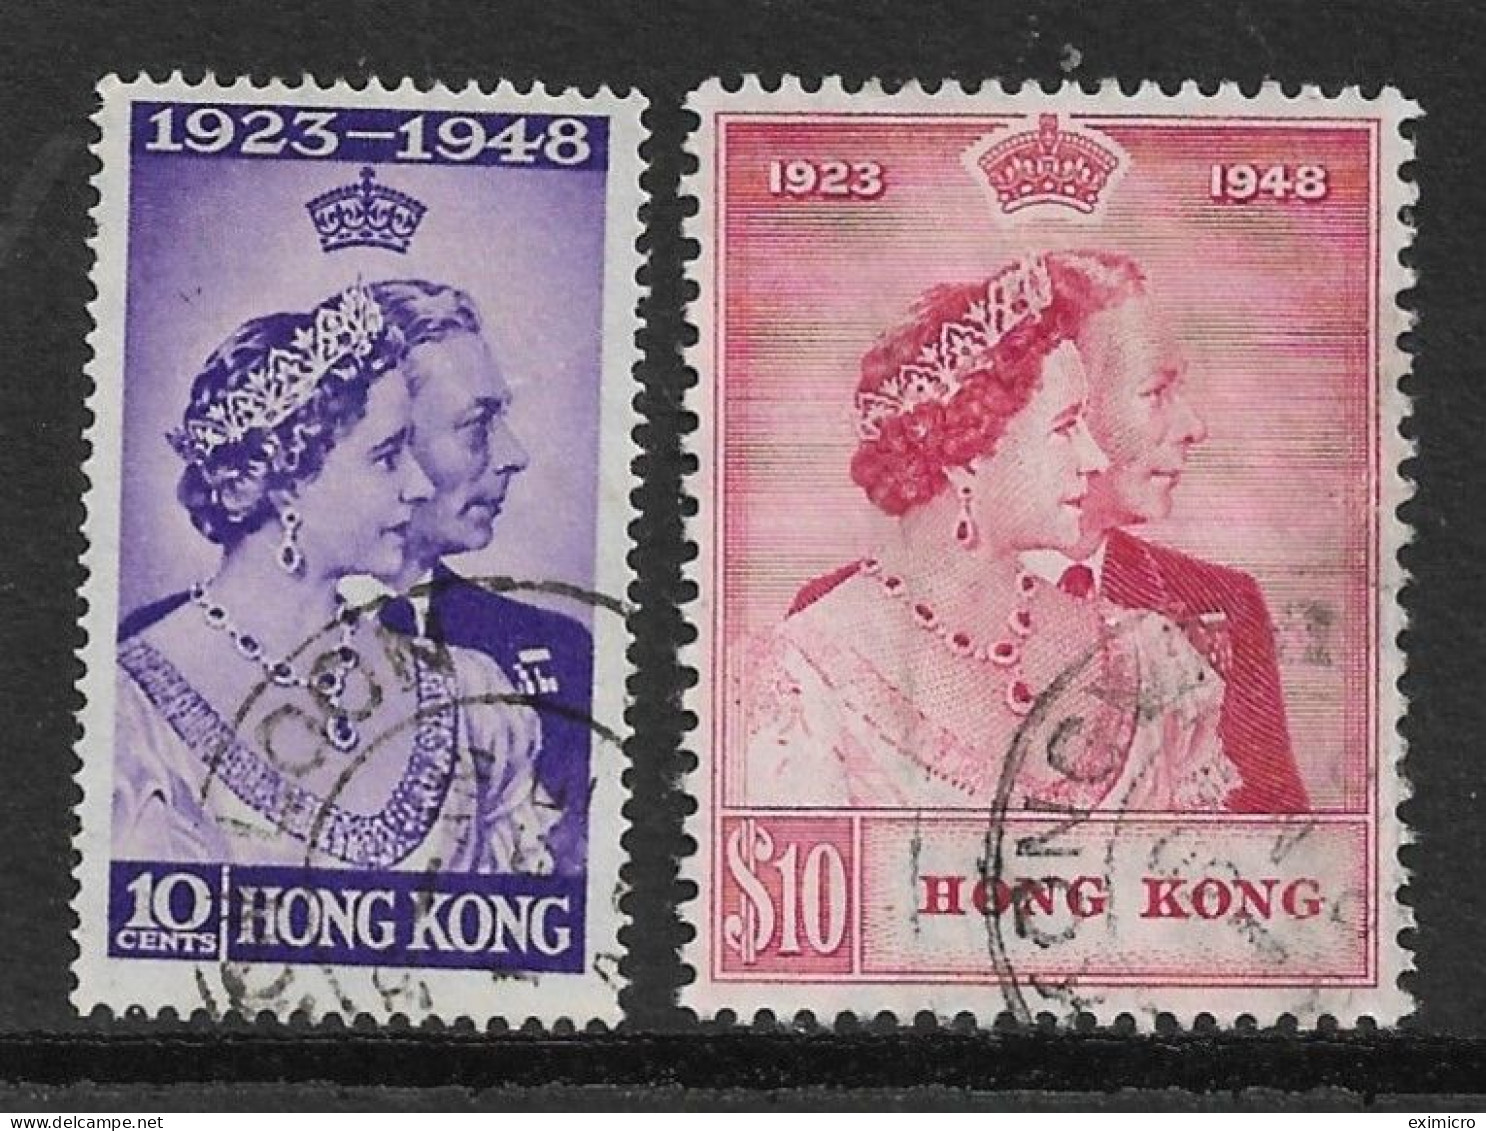 HONG KONG 1948 SILVER WEDDING SET FINE USED Cat £131+ - Used Stamps